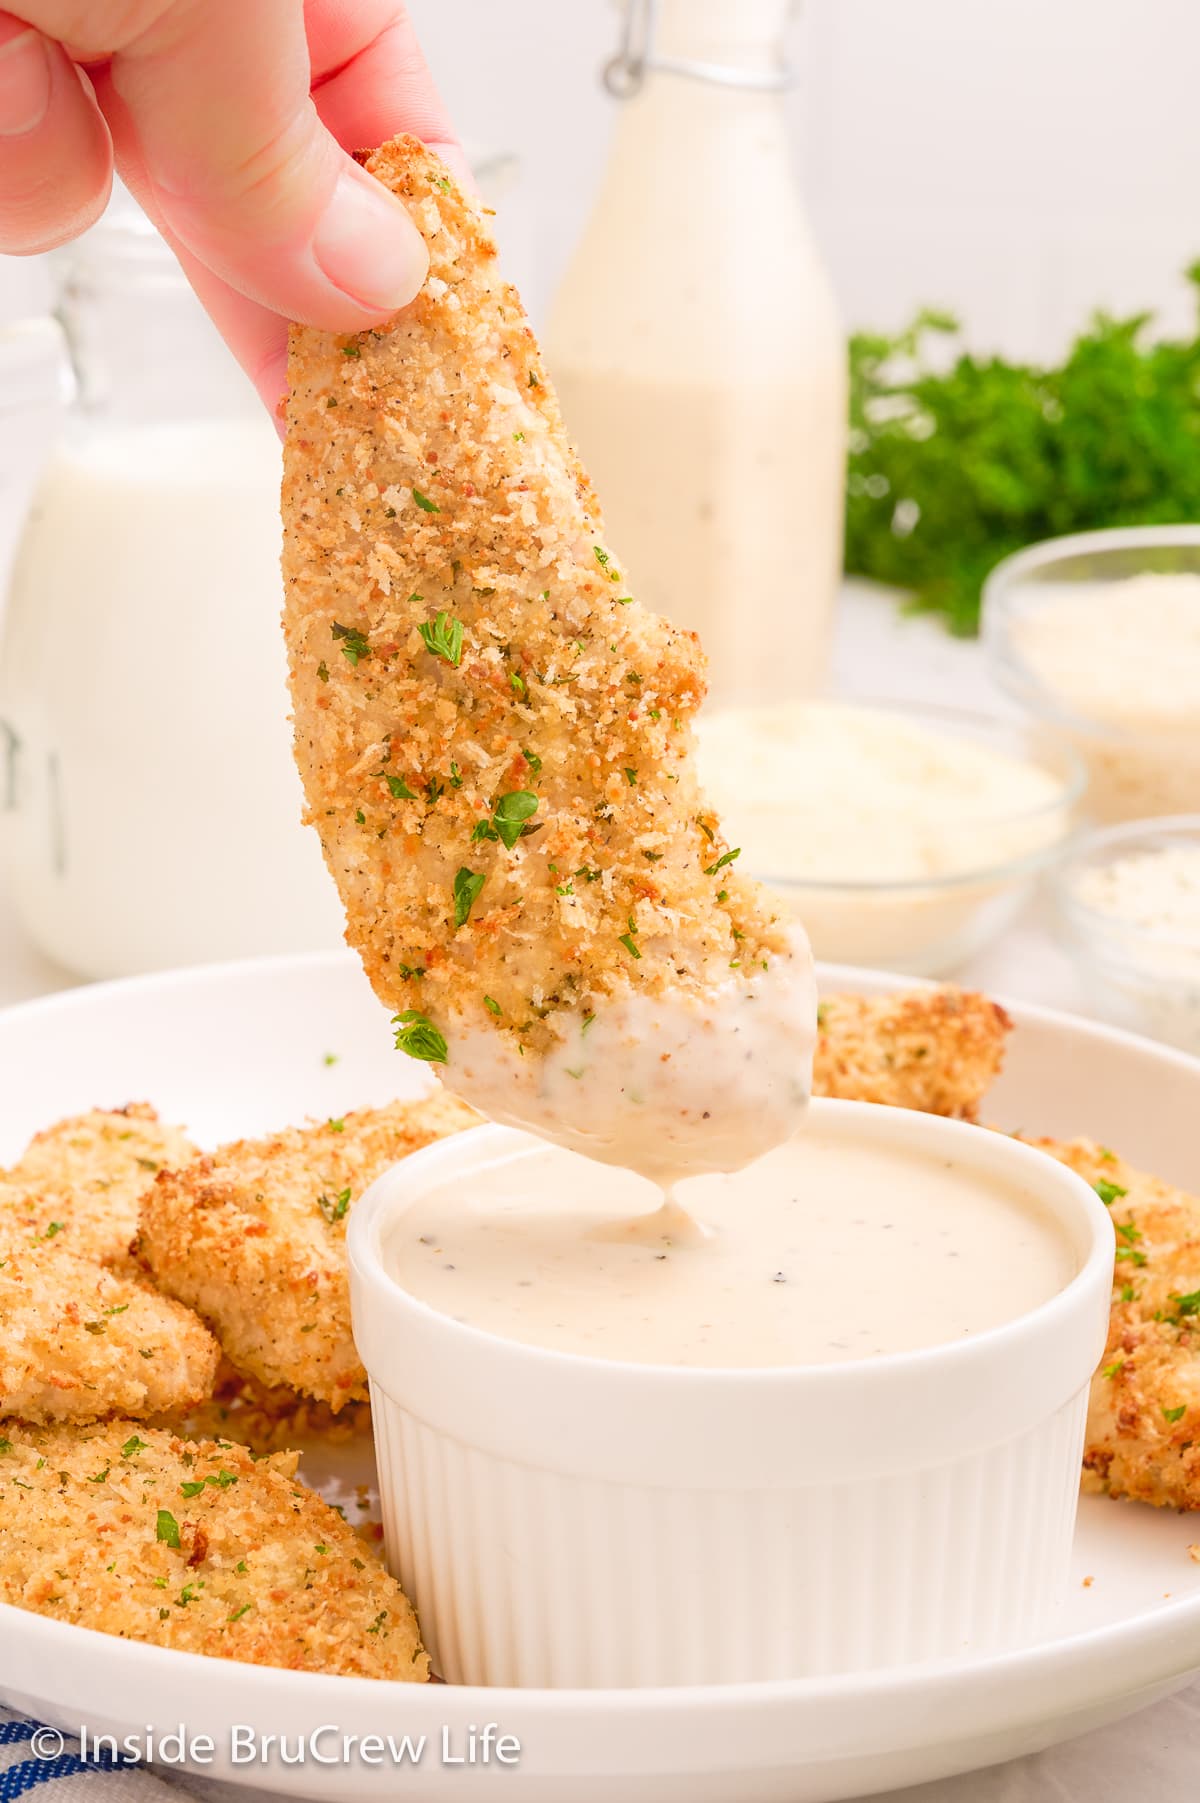 A crispy chicken tender being dipped in ranch dressing.